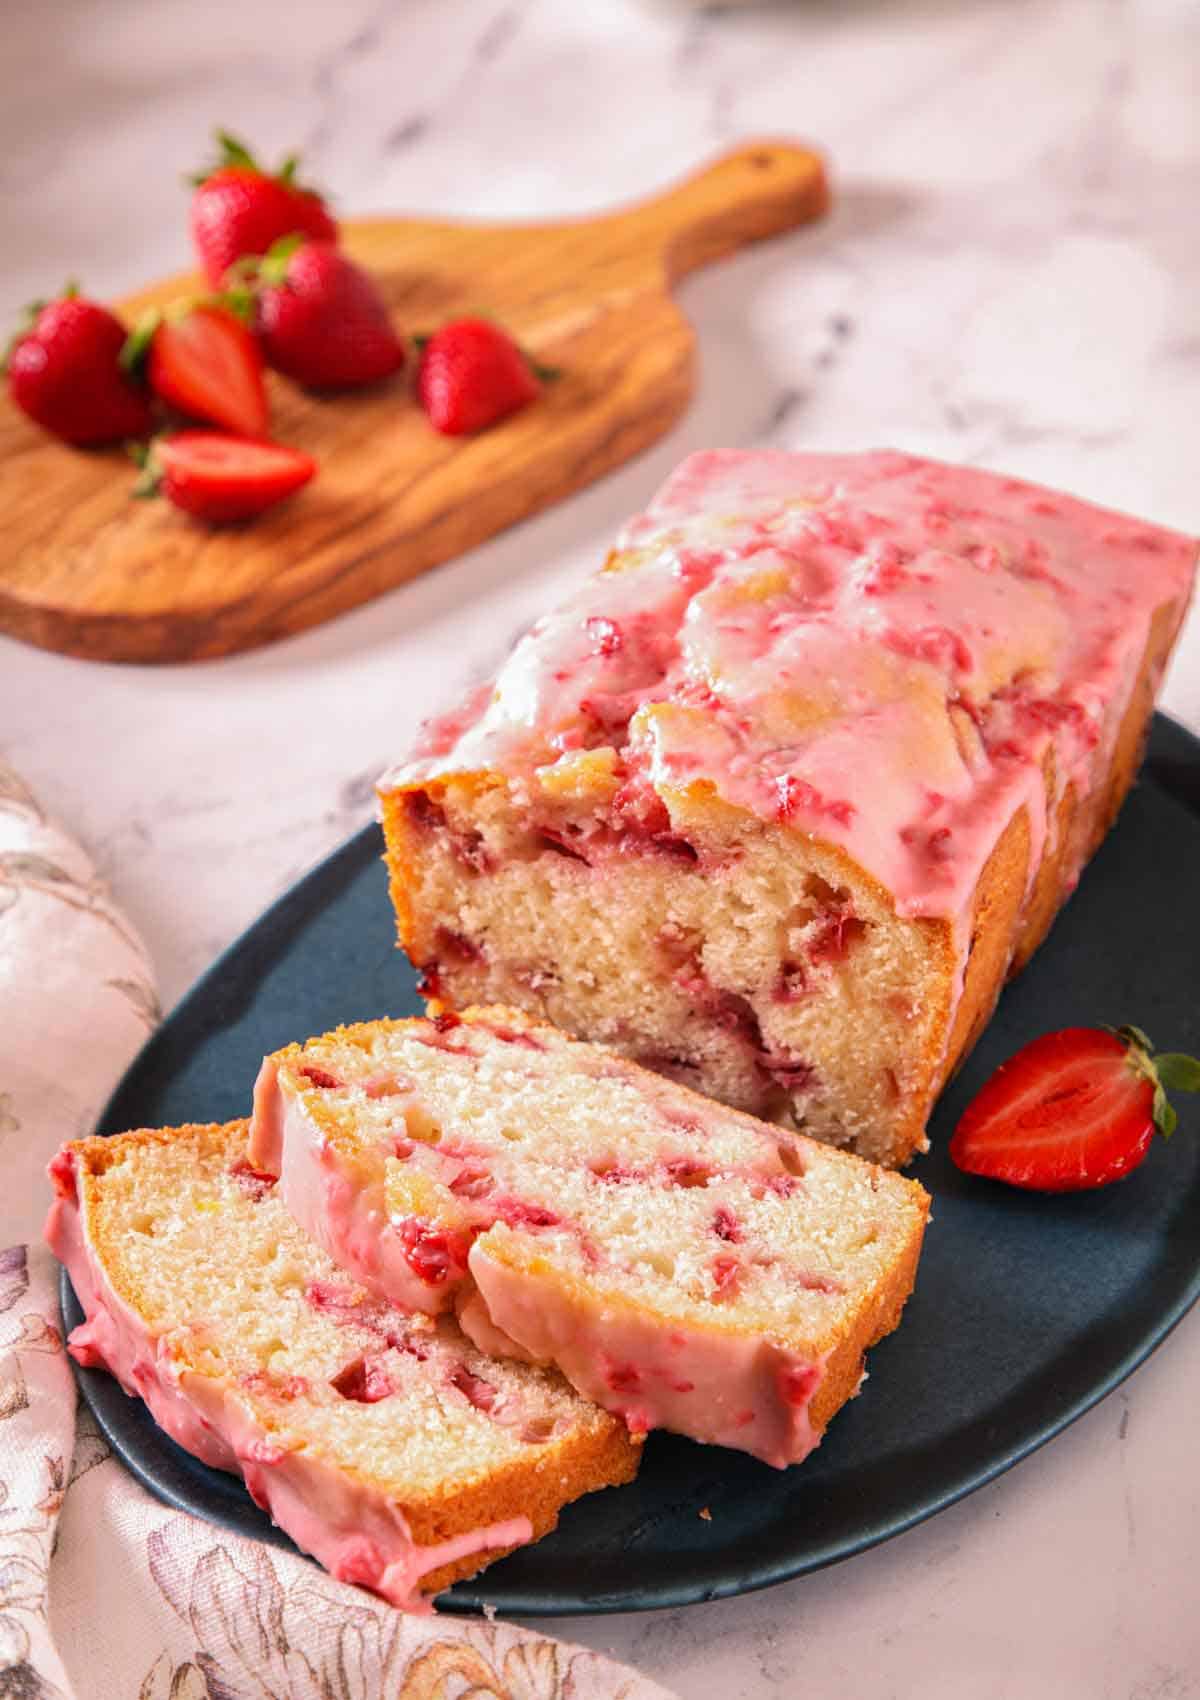 A loaf of strawberry bread on a blue platter with two slices cut in front.